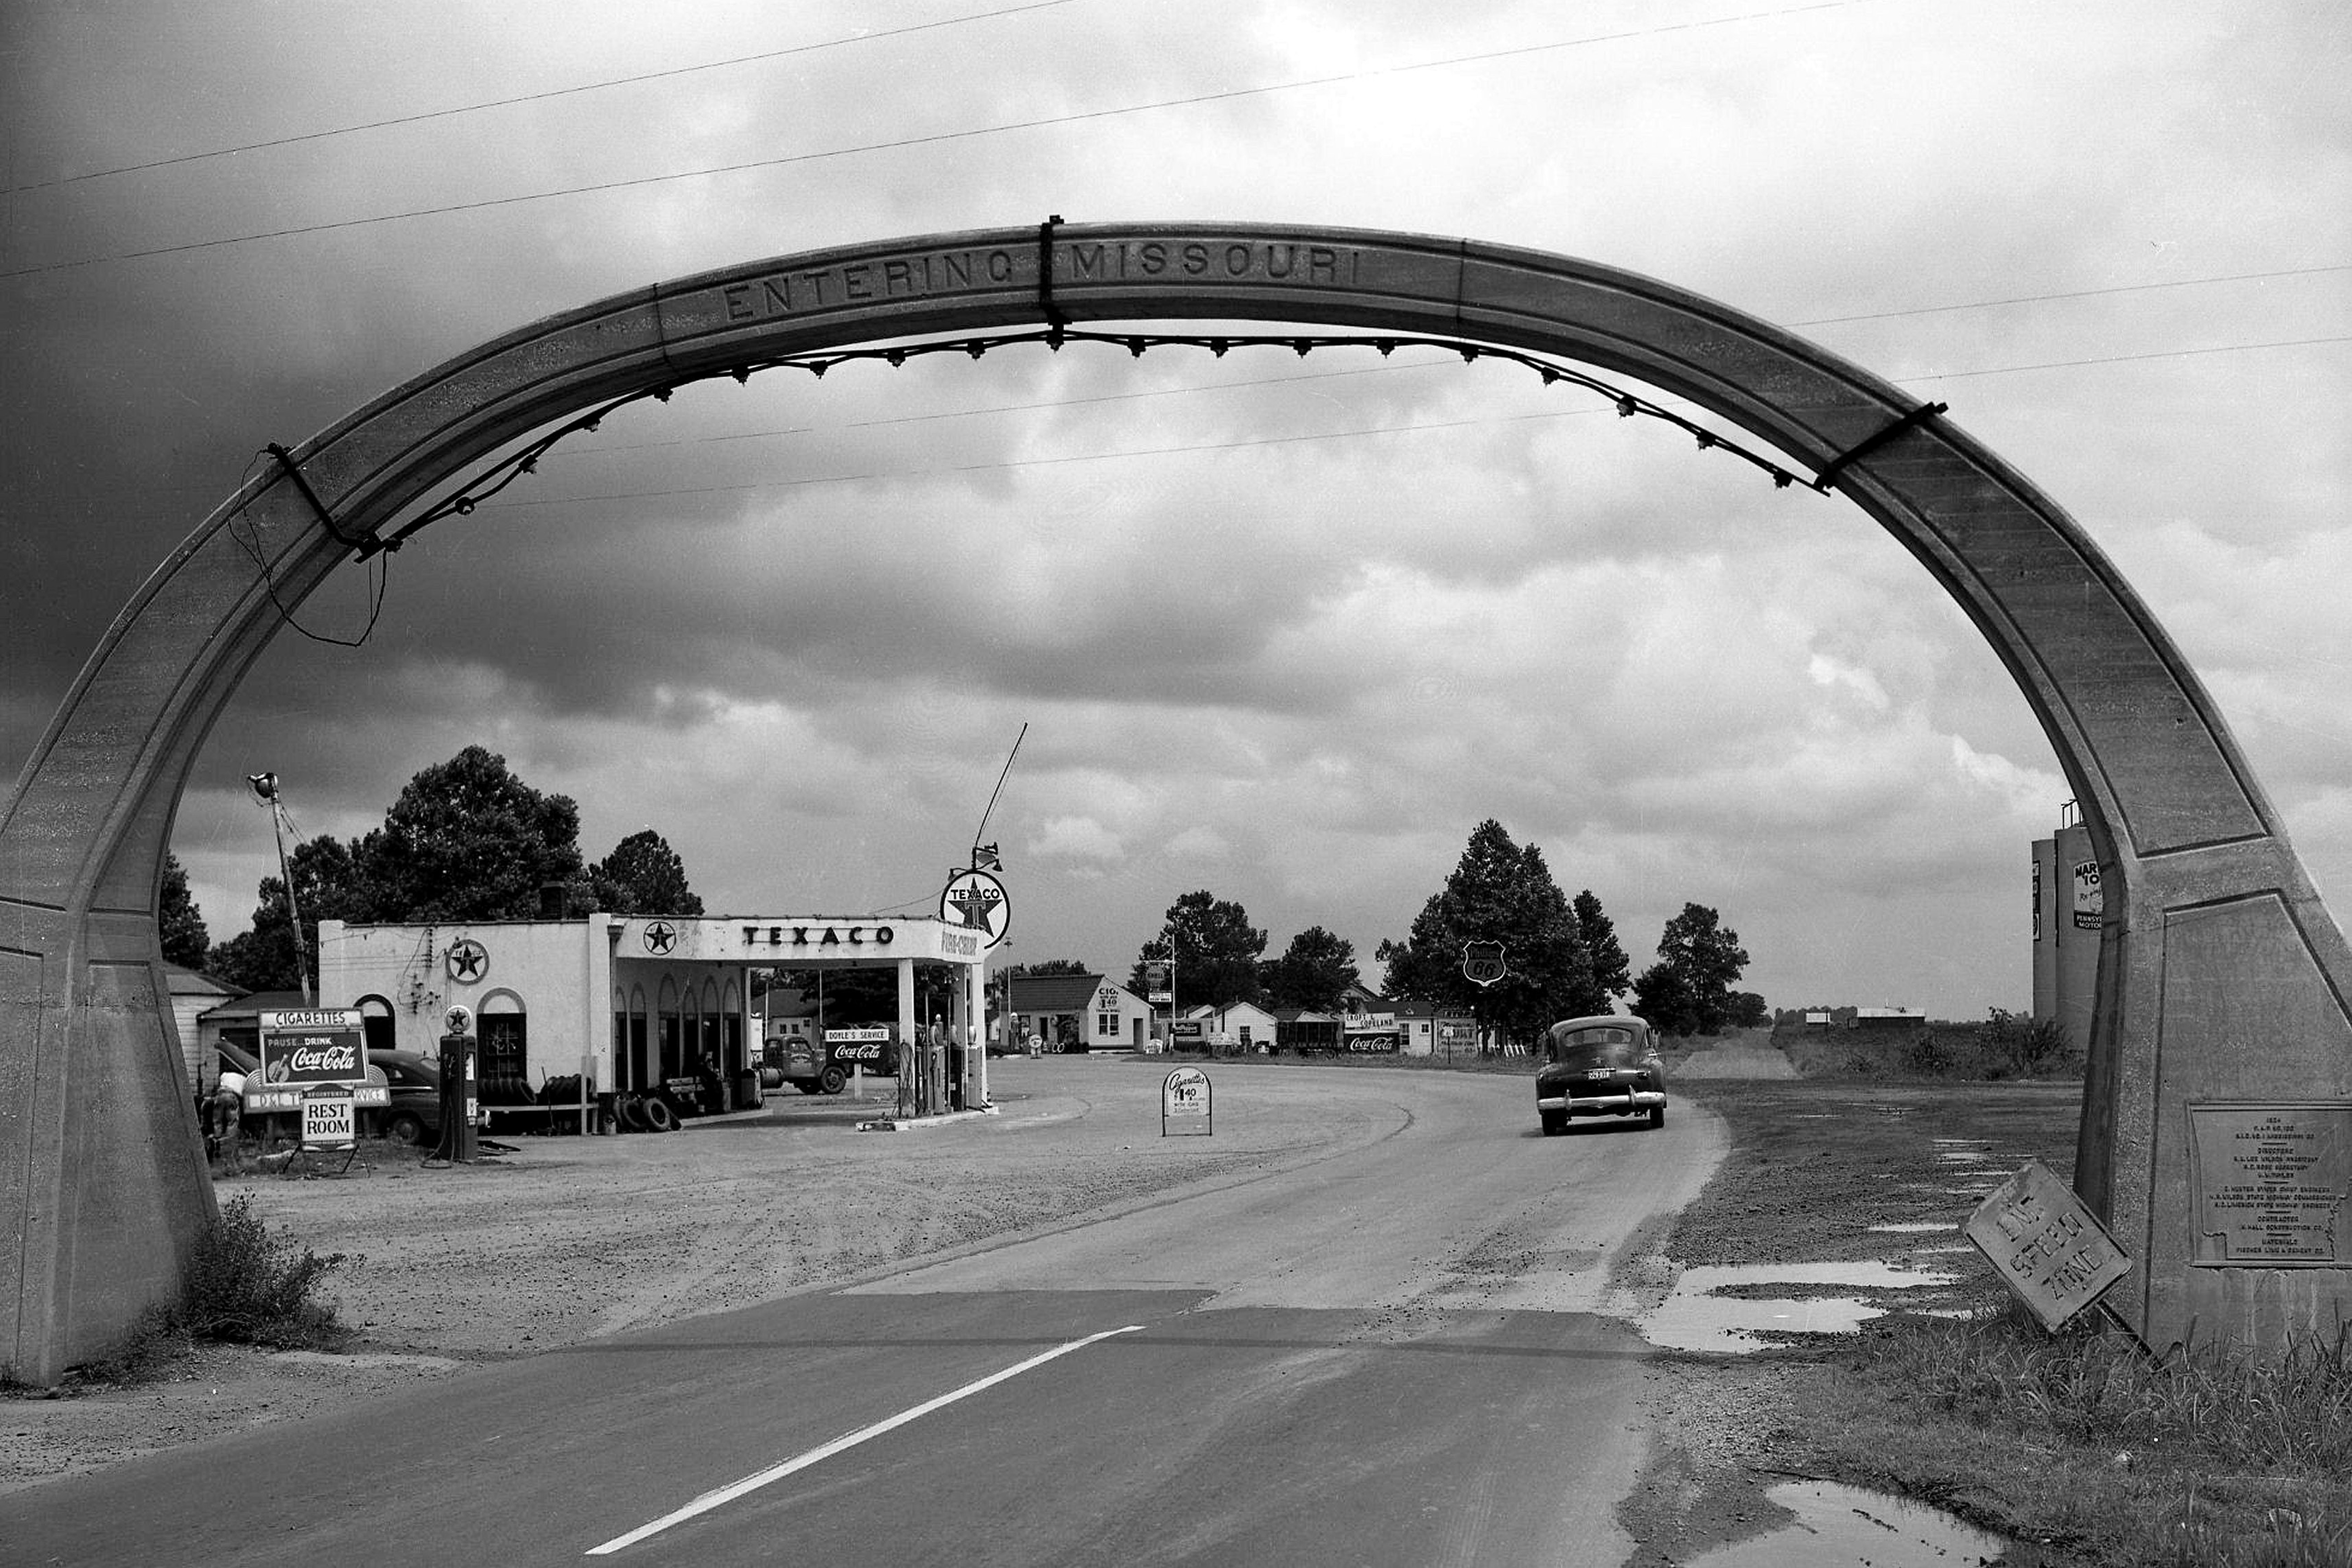 The U.S. Highway 61 arch sits on the state line between Blytheville, Arkansas and Steele, Missouri. The arch, built in 1924, is on the National Register of Historic Places.